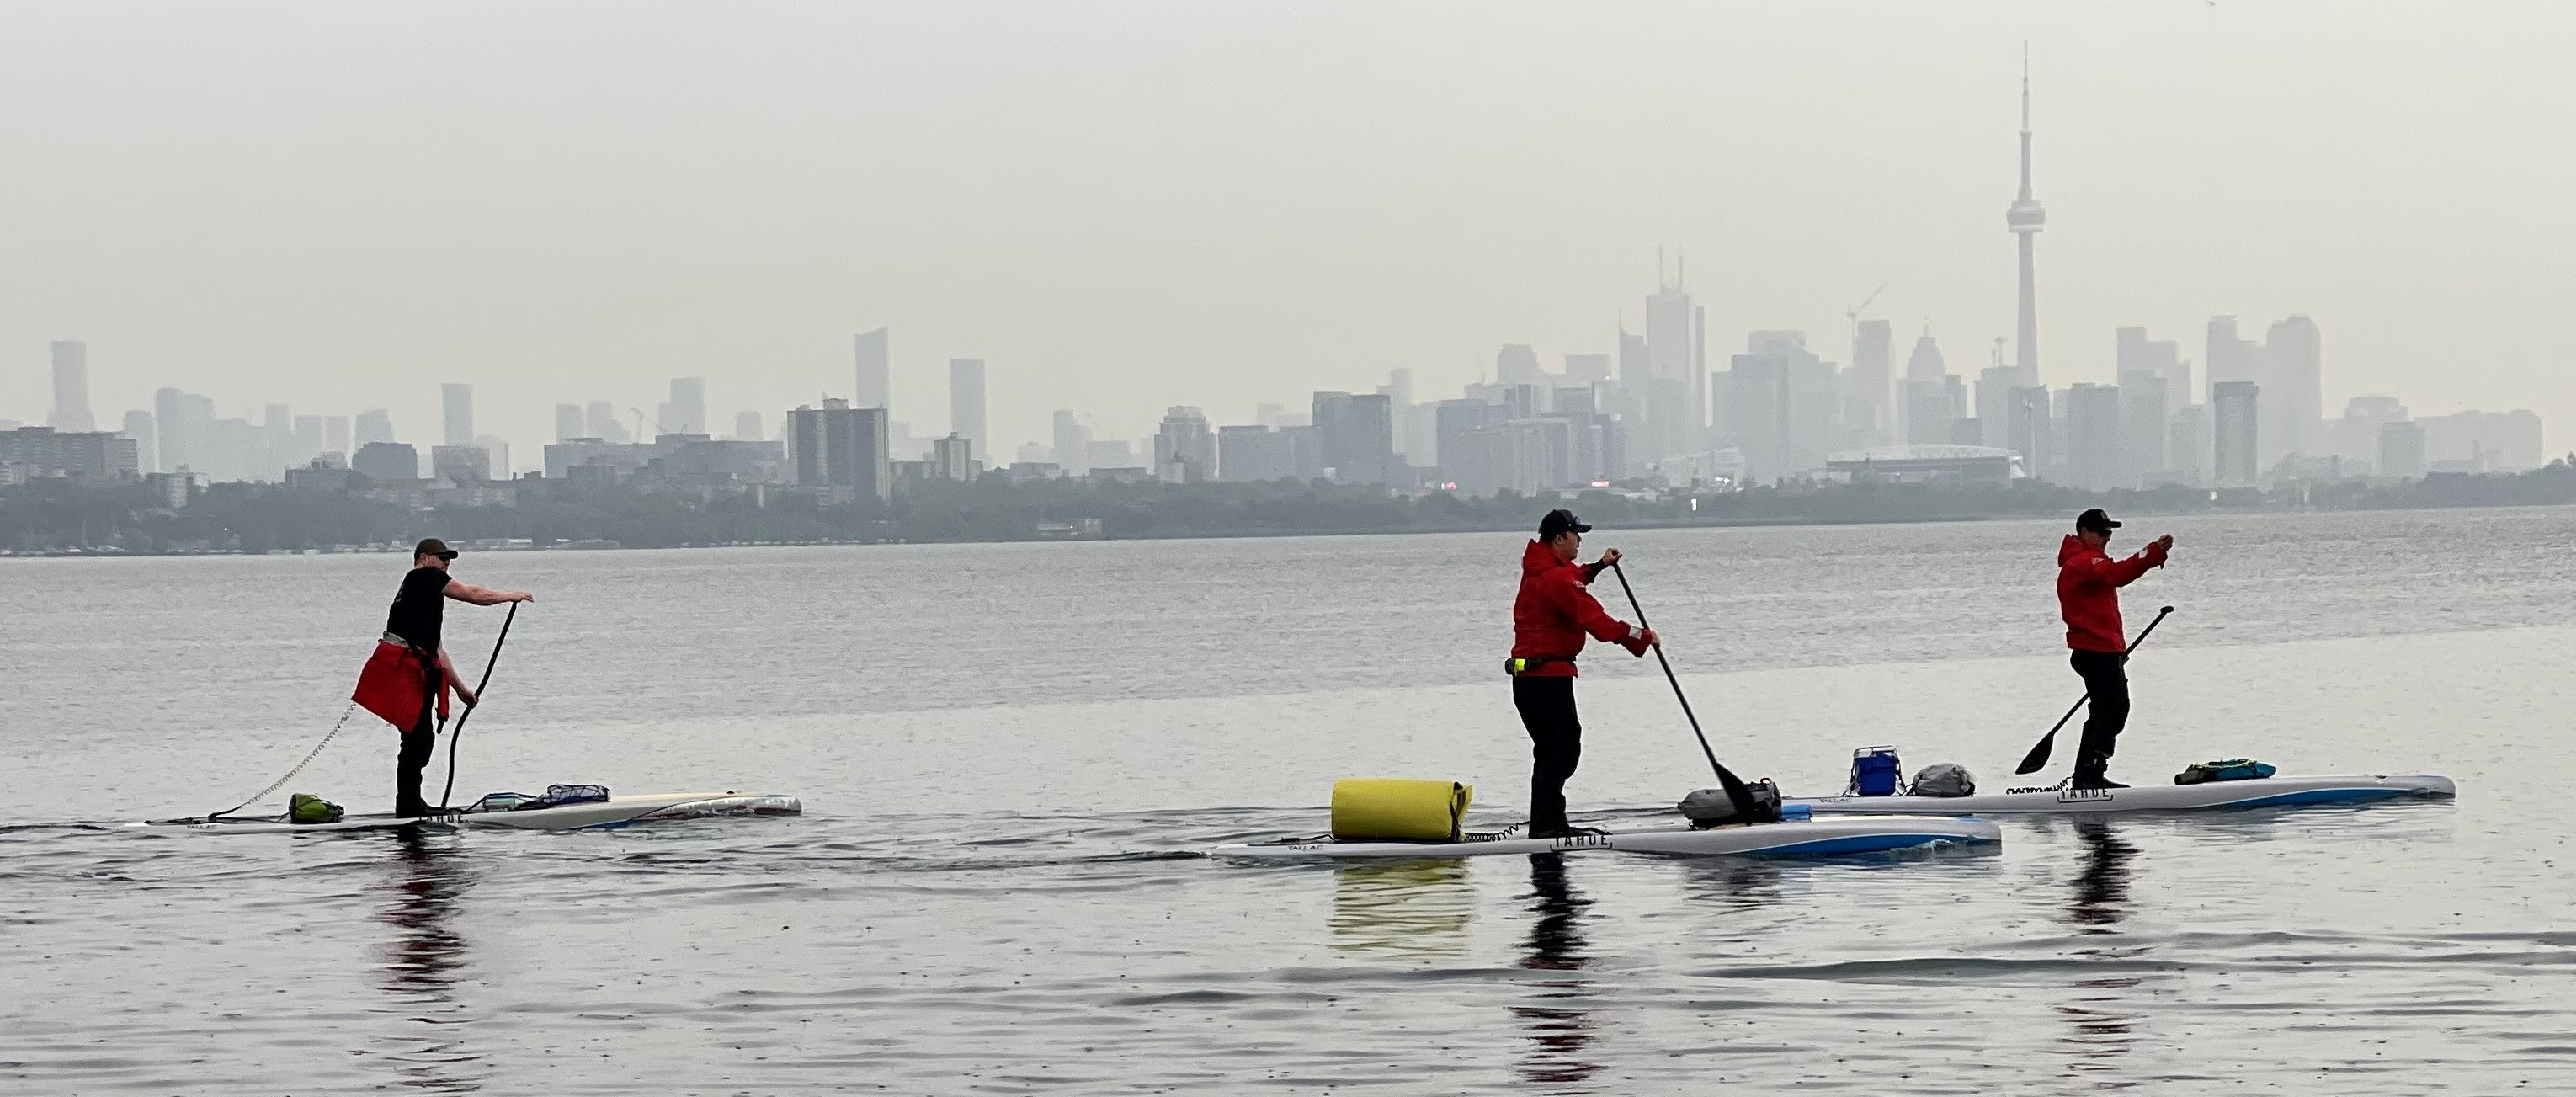 Joe Lorenz, Jeff Guy, Kwin Morris after departing from Toronto on Lake Ontario heading for Fort Niagara. The paddle was a 35 mile 13 hour journey on Friday, June 9, 2023.